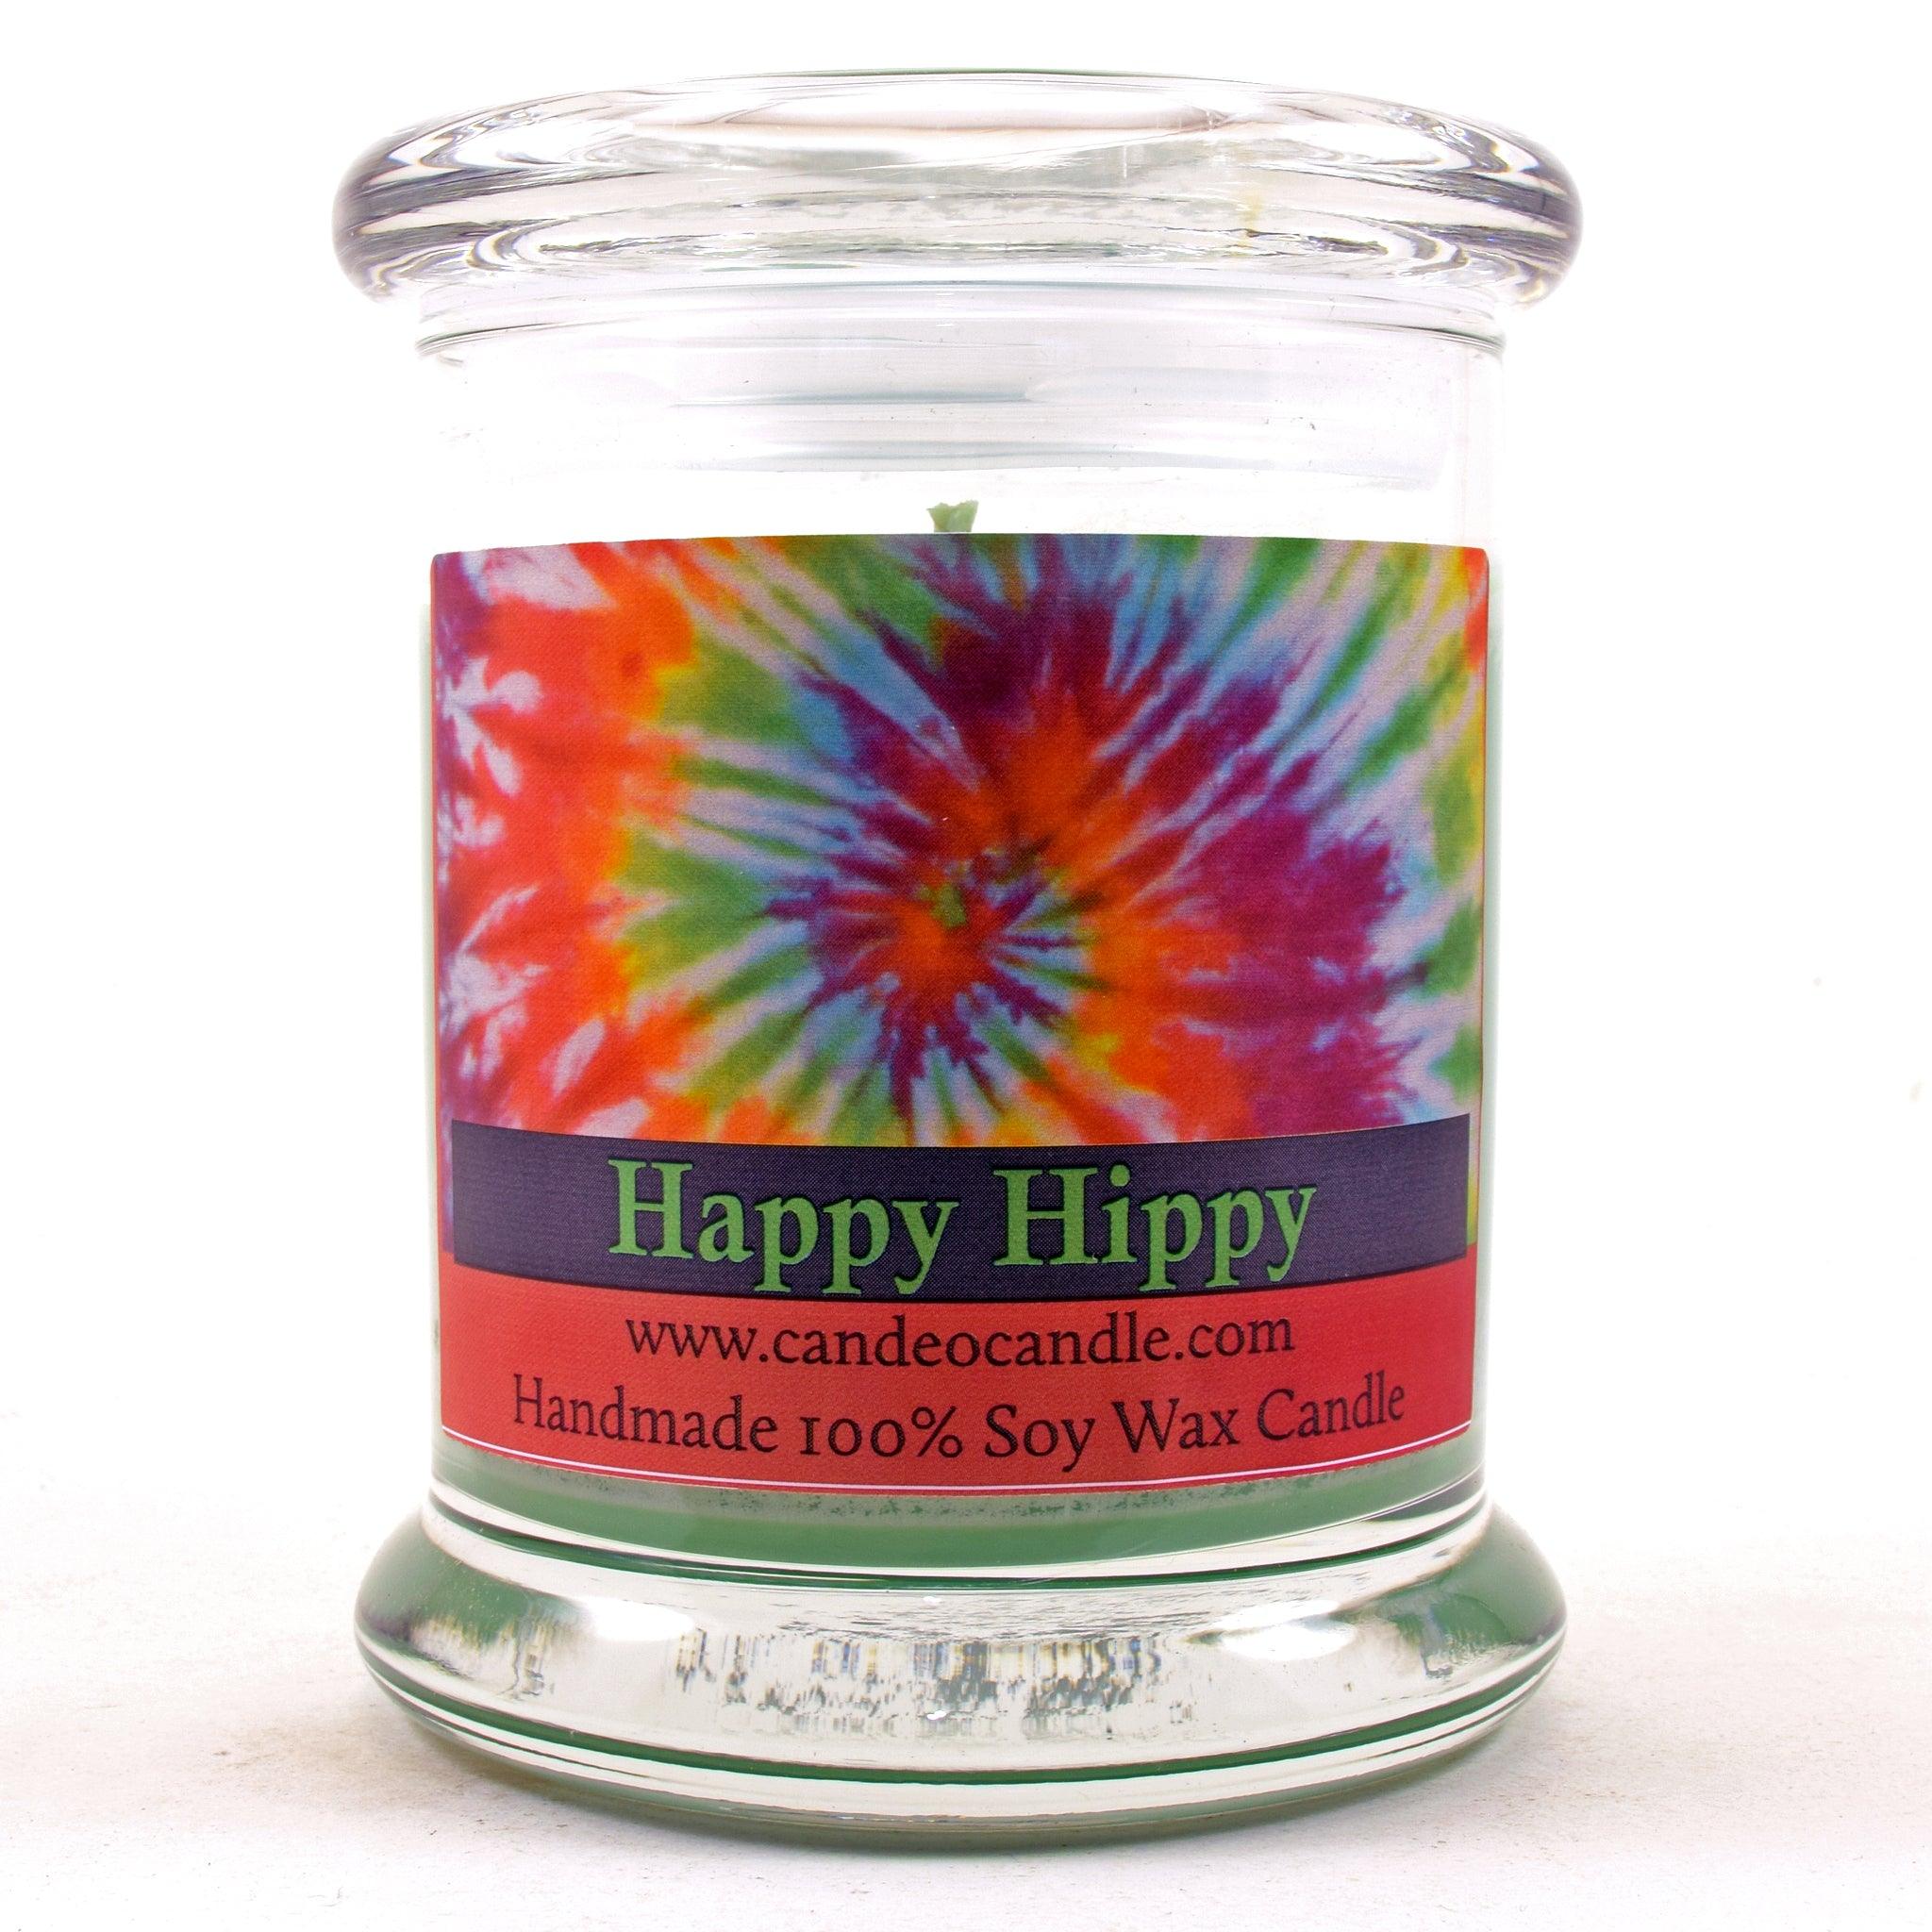 Happy Hippy, 9oz Soy Candle Jar - Candeo Candle